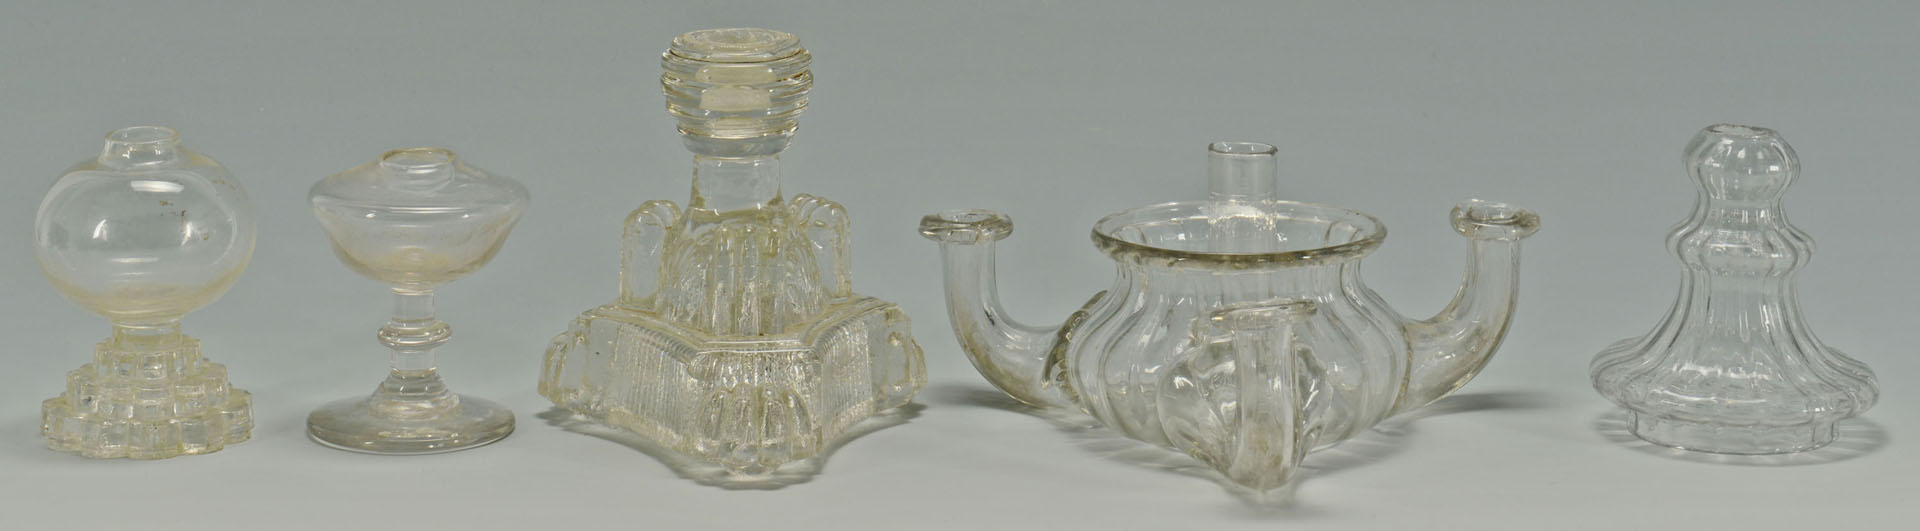 Lot 283: 9 Colorless blown and molded glass oil lamps